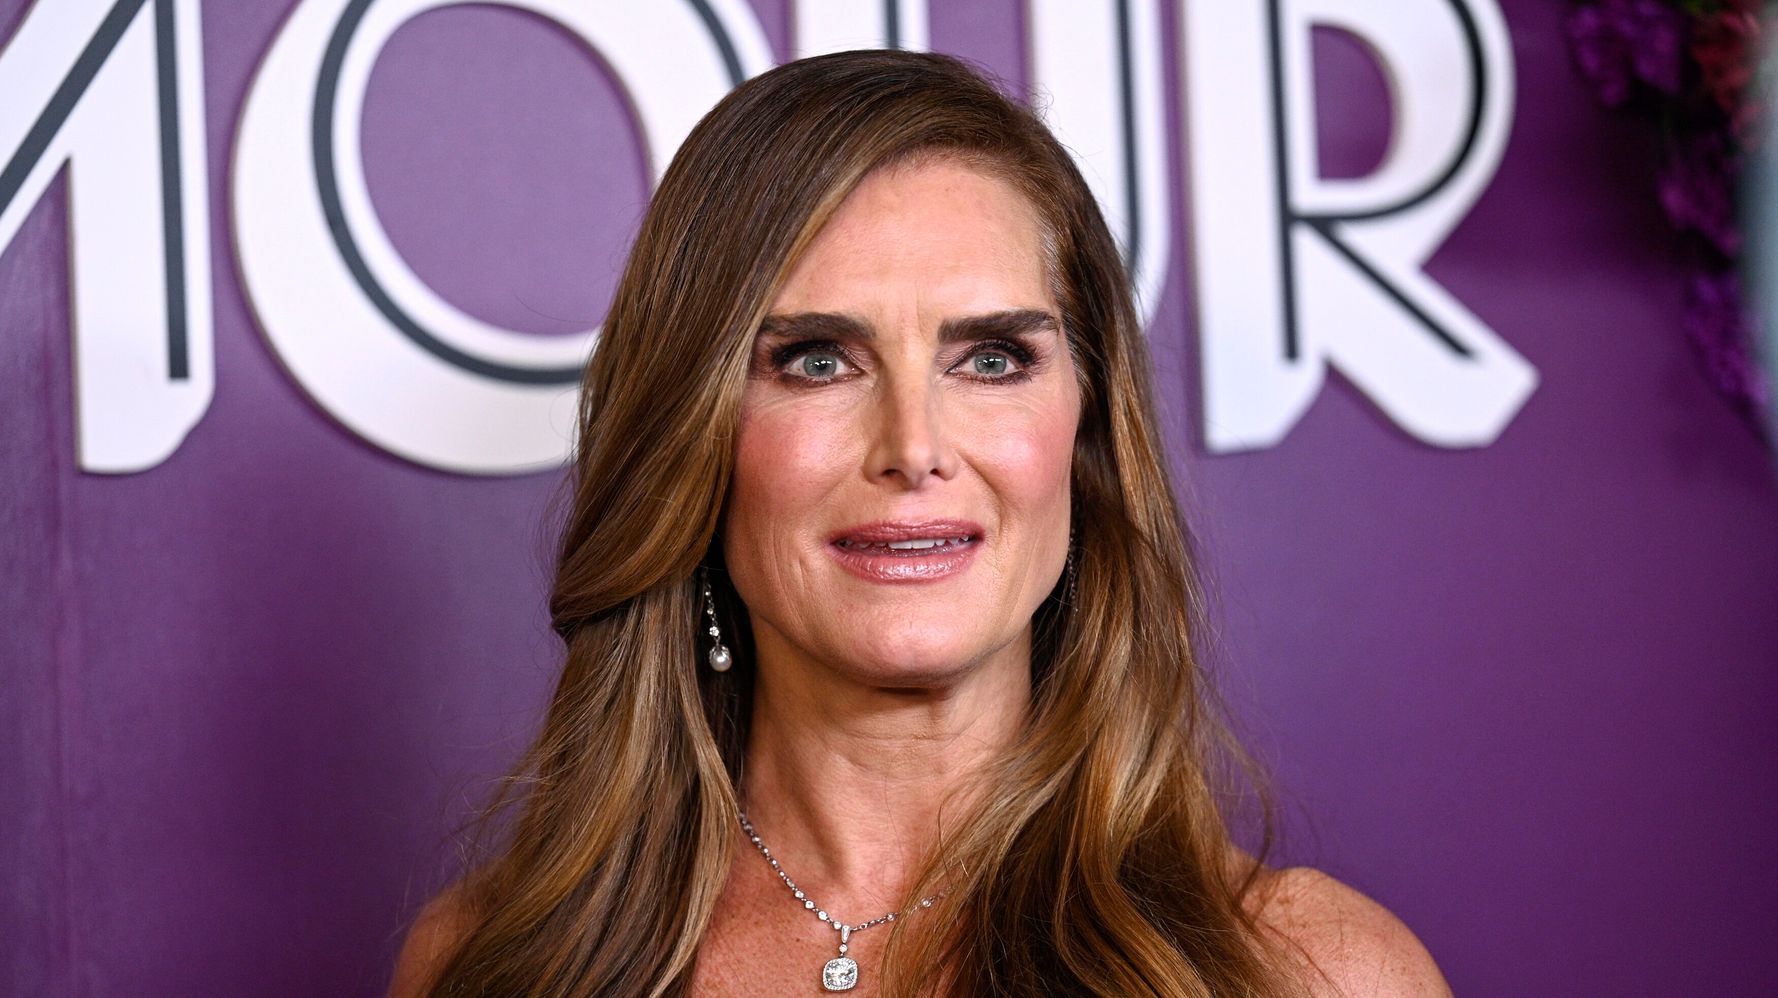 Brooke Shields Says Barbara Walters Interview Of Her Was
‘Practically Criminal’